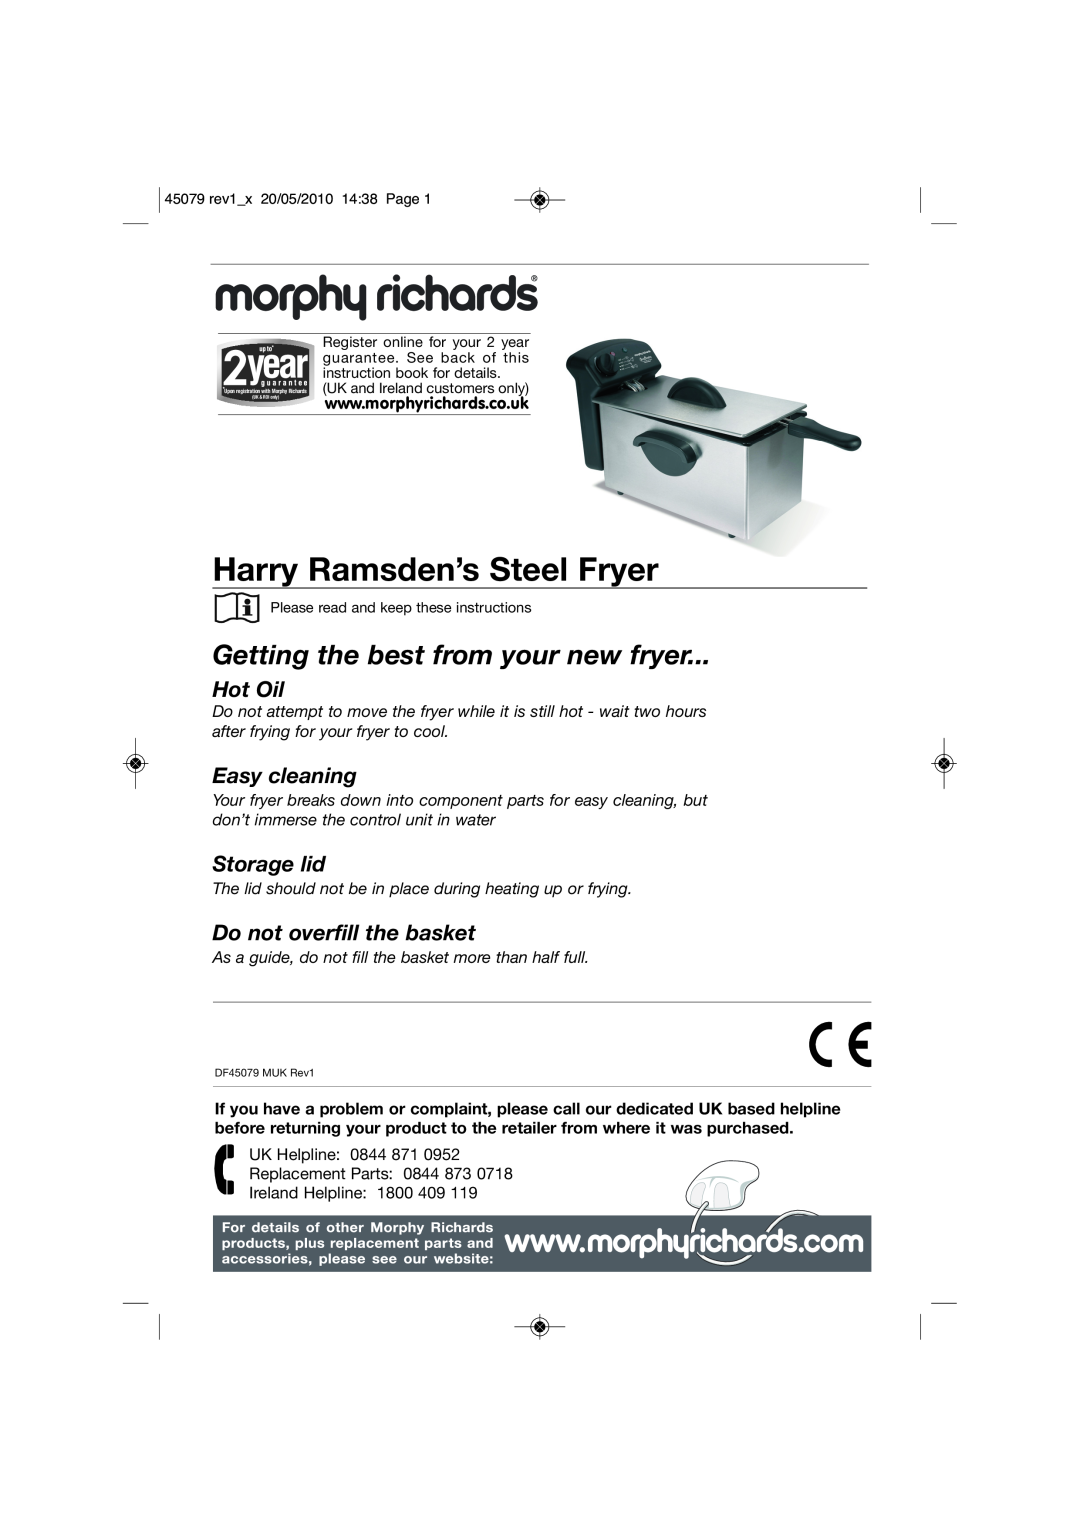 Morphy Richards DF45079 manual Harry Ramsden’s Steel Fryer, Getting the best from your new fryer, Hot Oil, Easy cleaning 